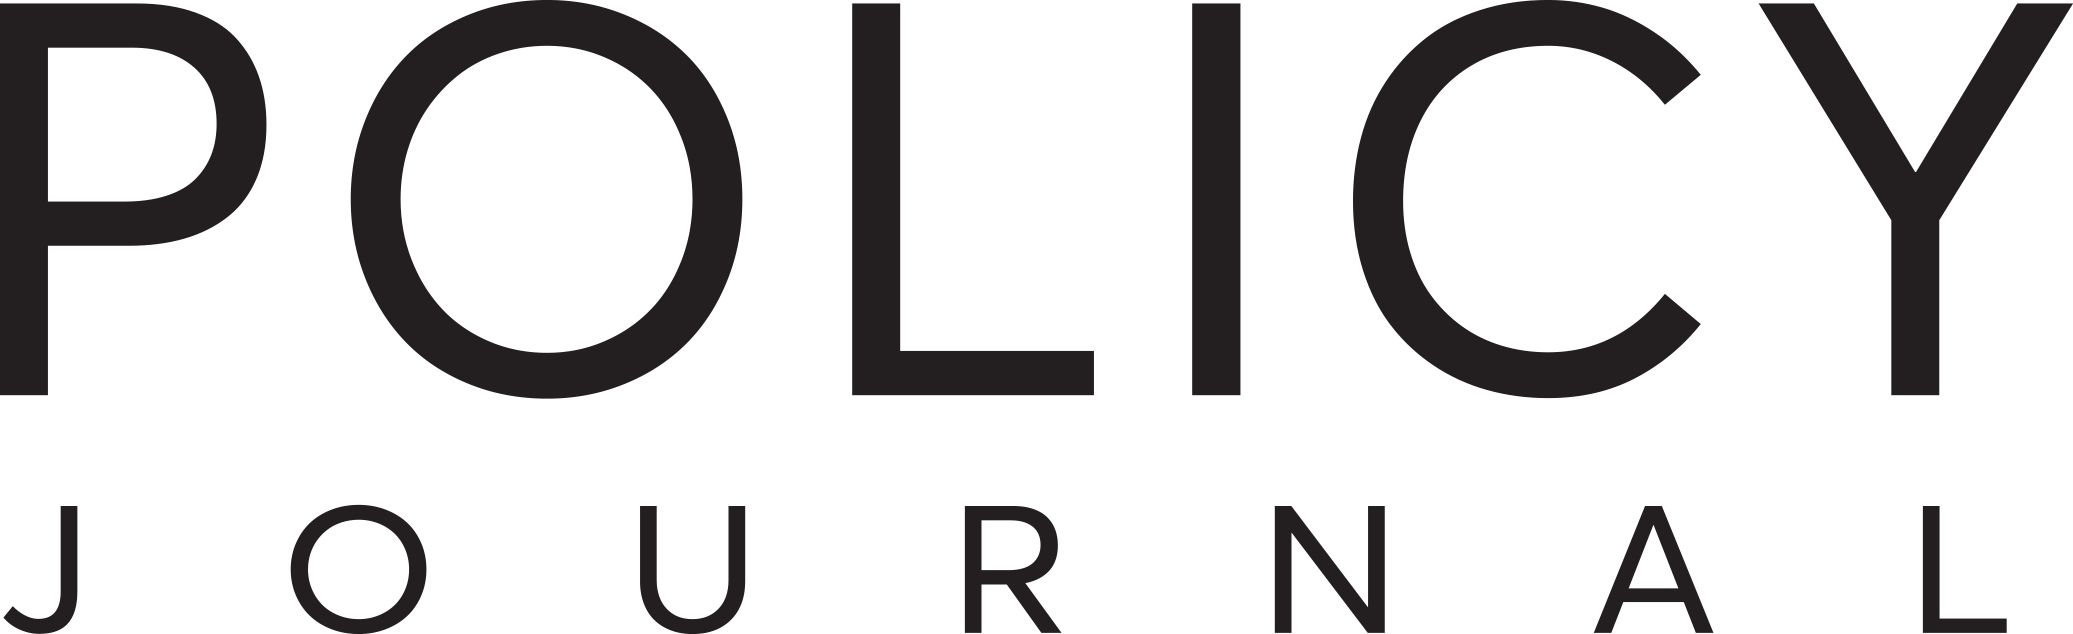 Policy Journal